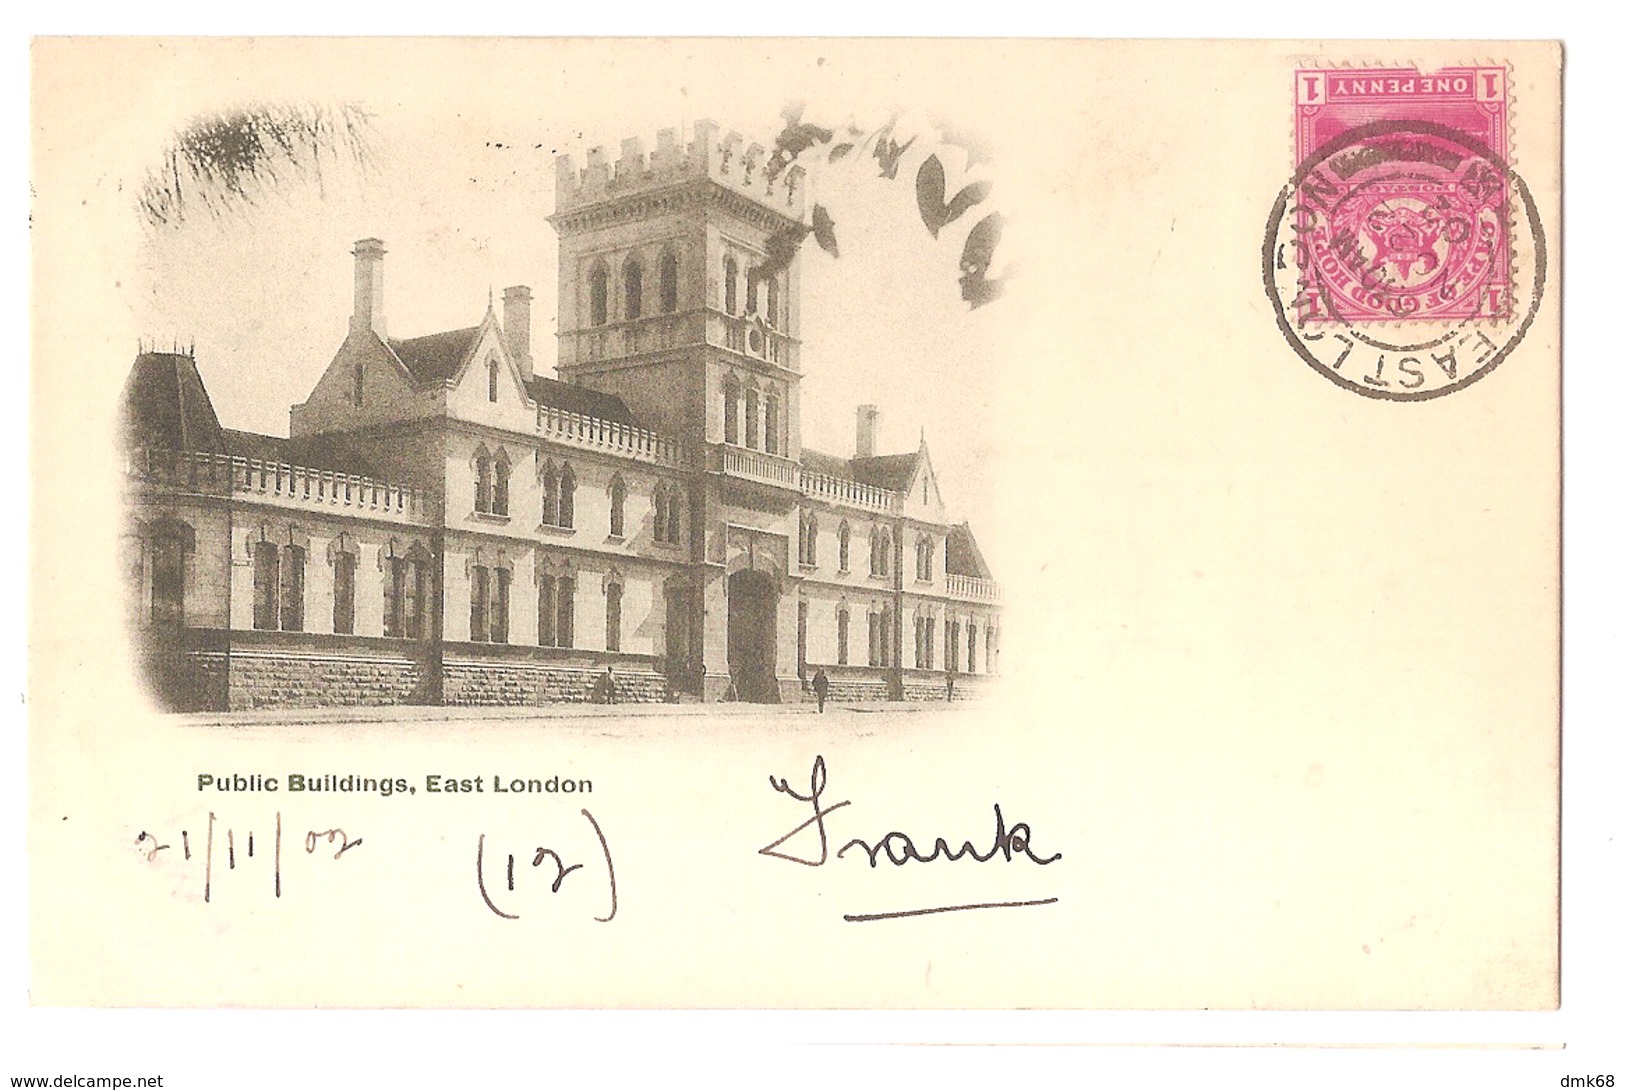 SOUTH AFRICA - EAST LONDON - PUBLIC BUILDINGS - STAMP - MAILED TO ITALY 1902 - ( 2783) - Afrique Du Sud